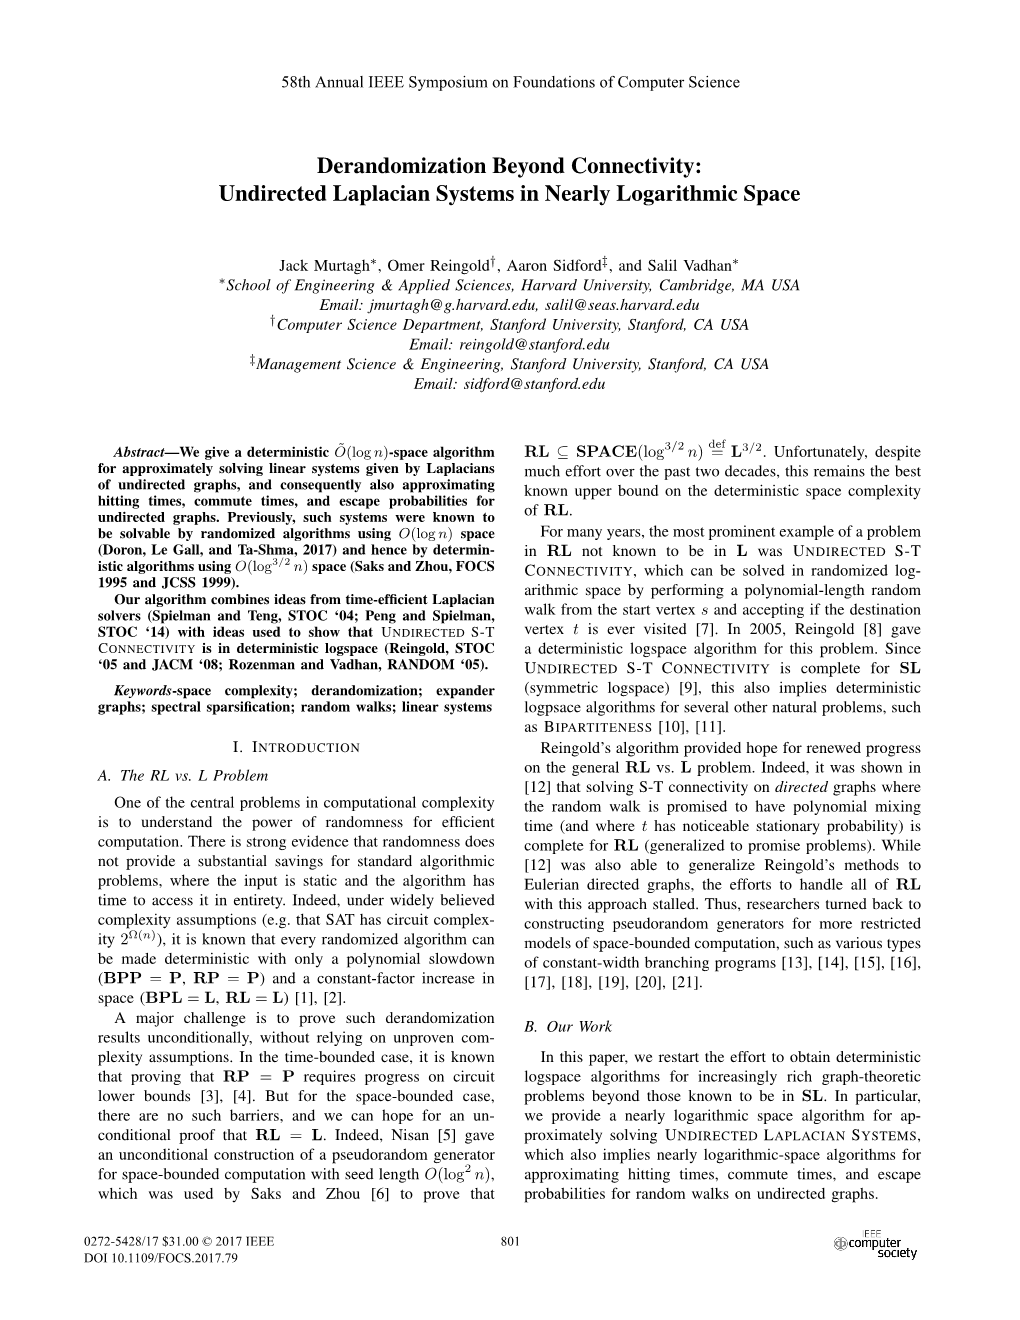 Derandomization Beyond Connectivity: Undirected Laplacian Systems in Nearly Logarithmic Space